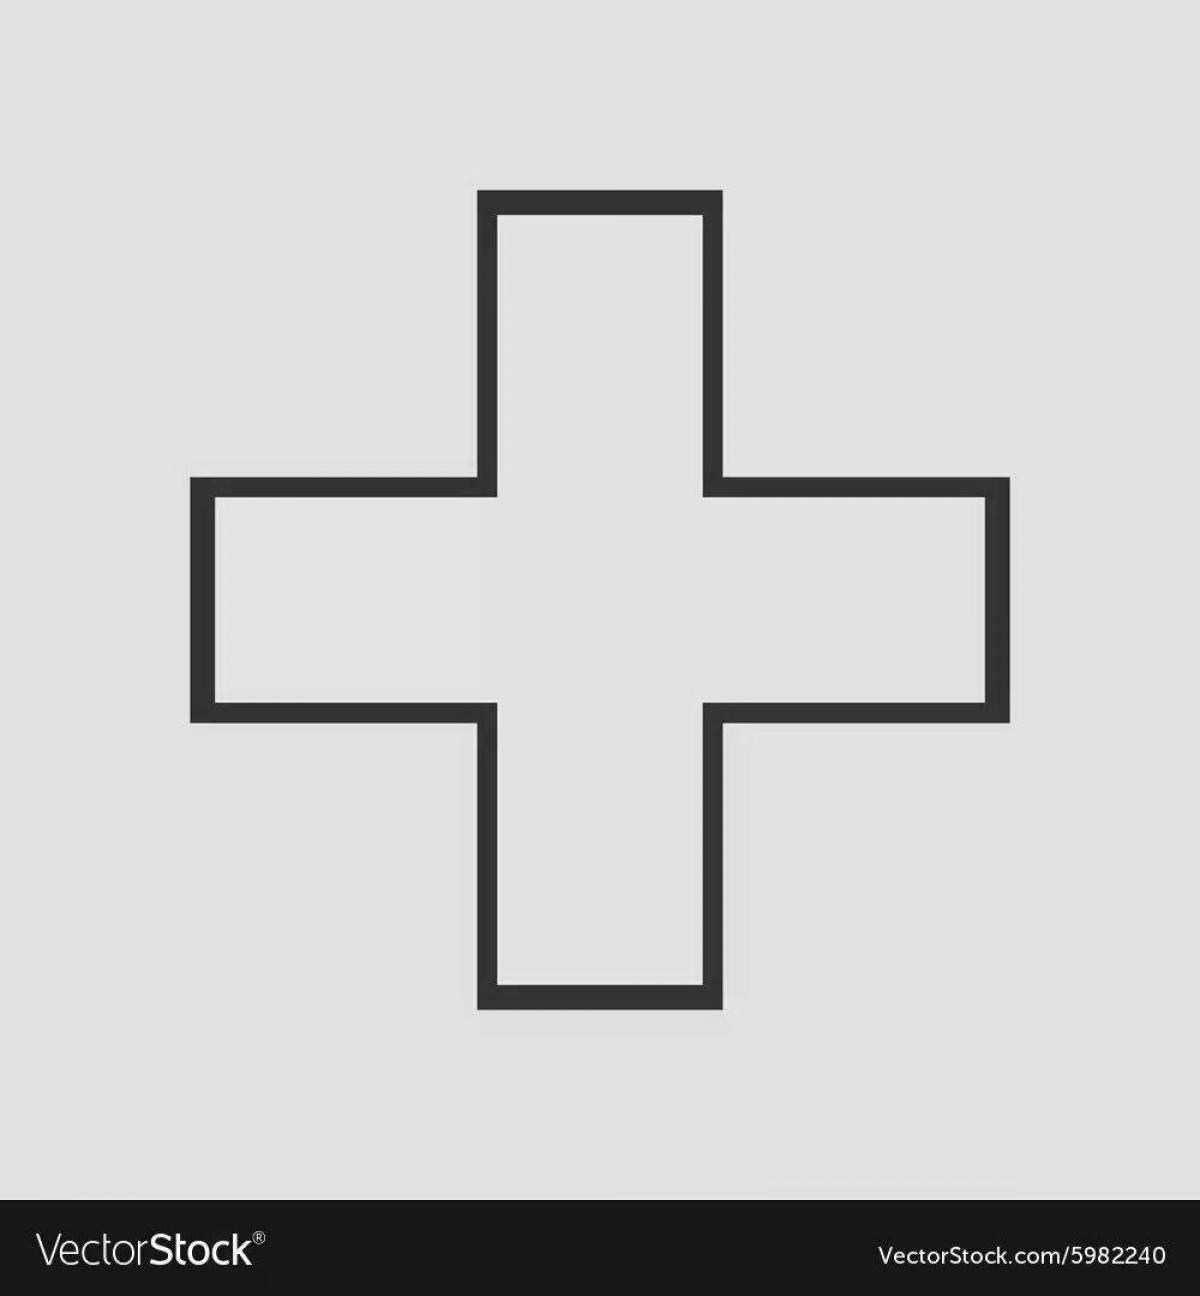 Colouring funny medical cross